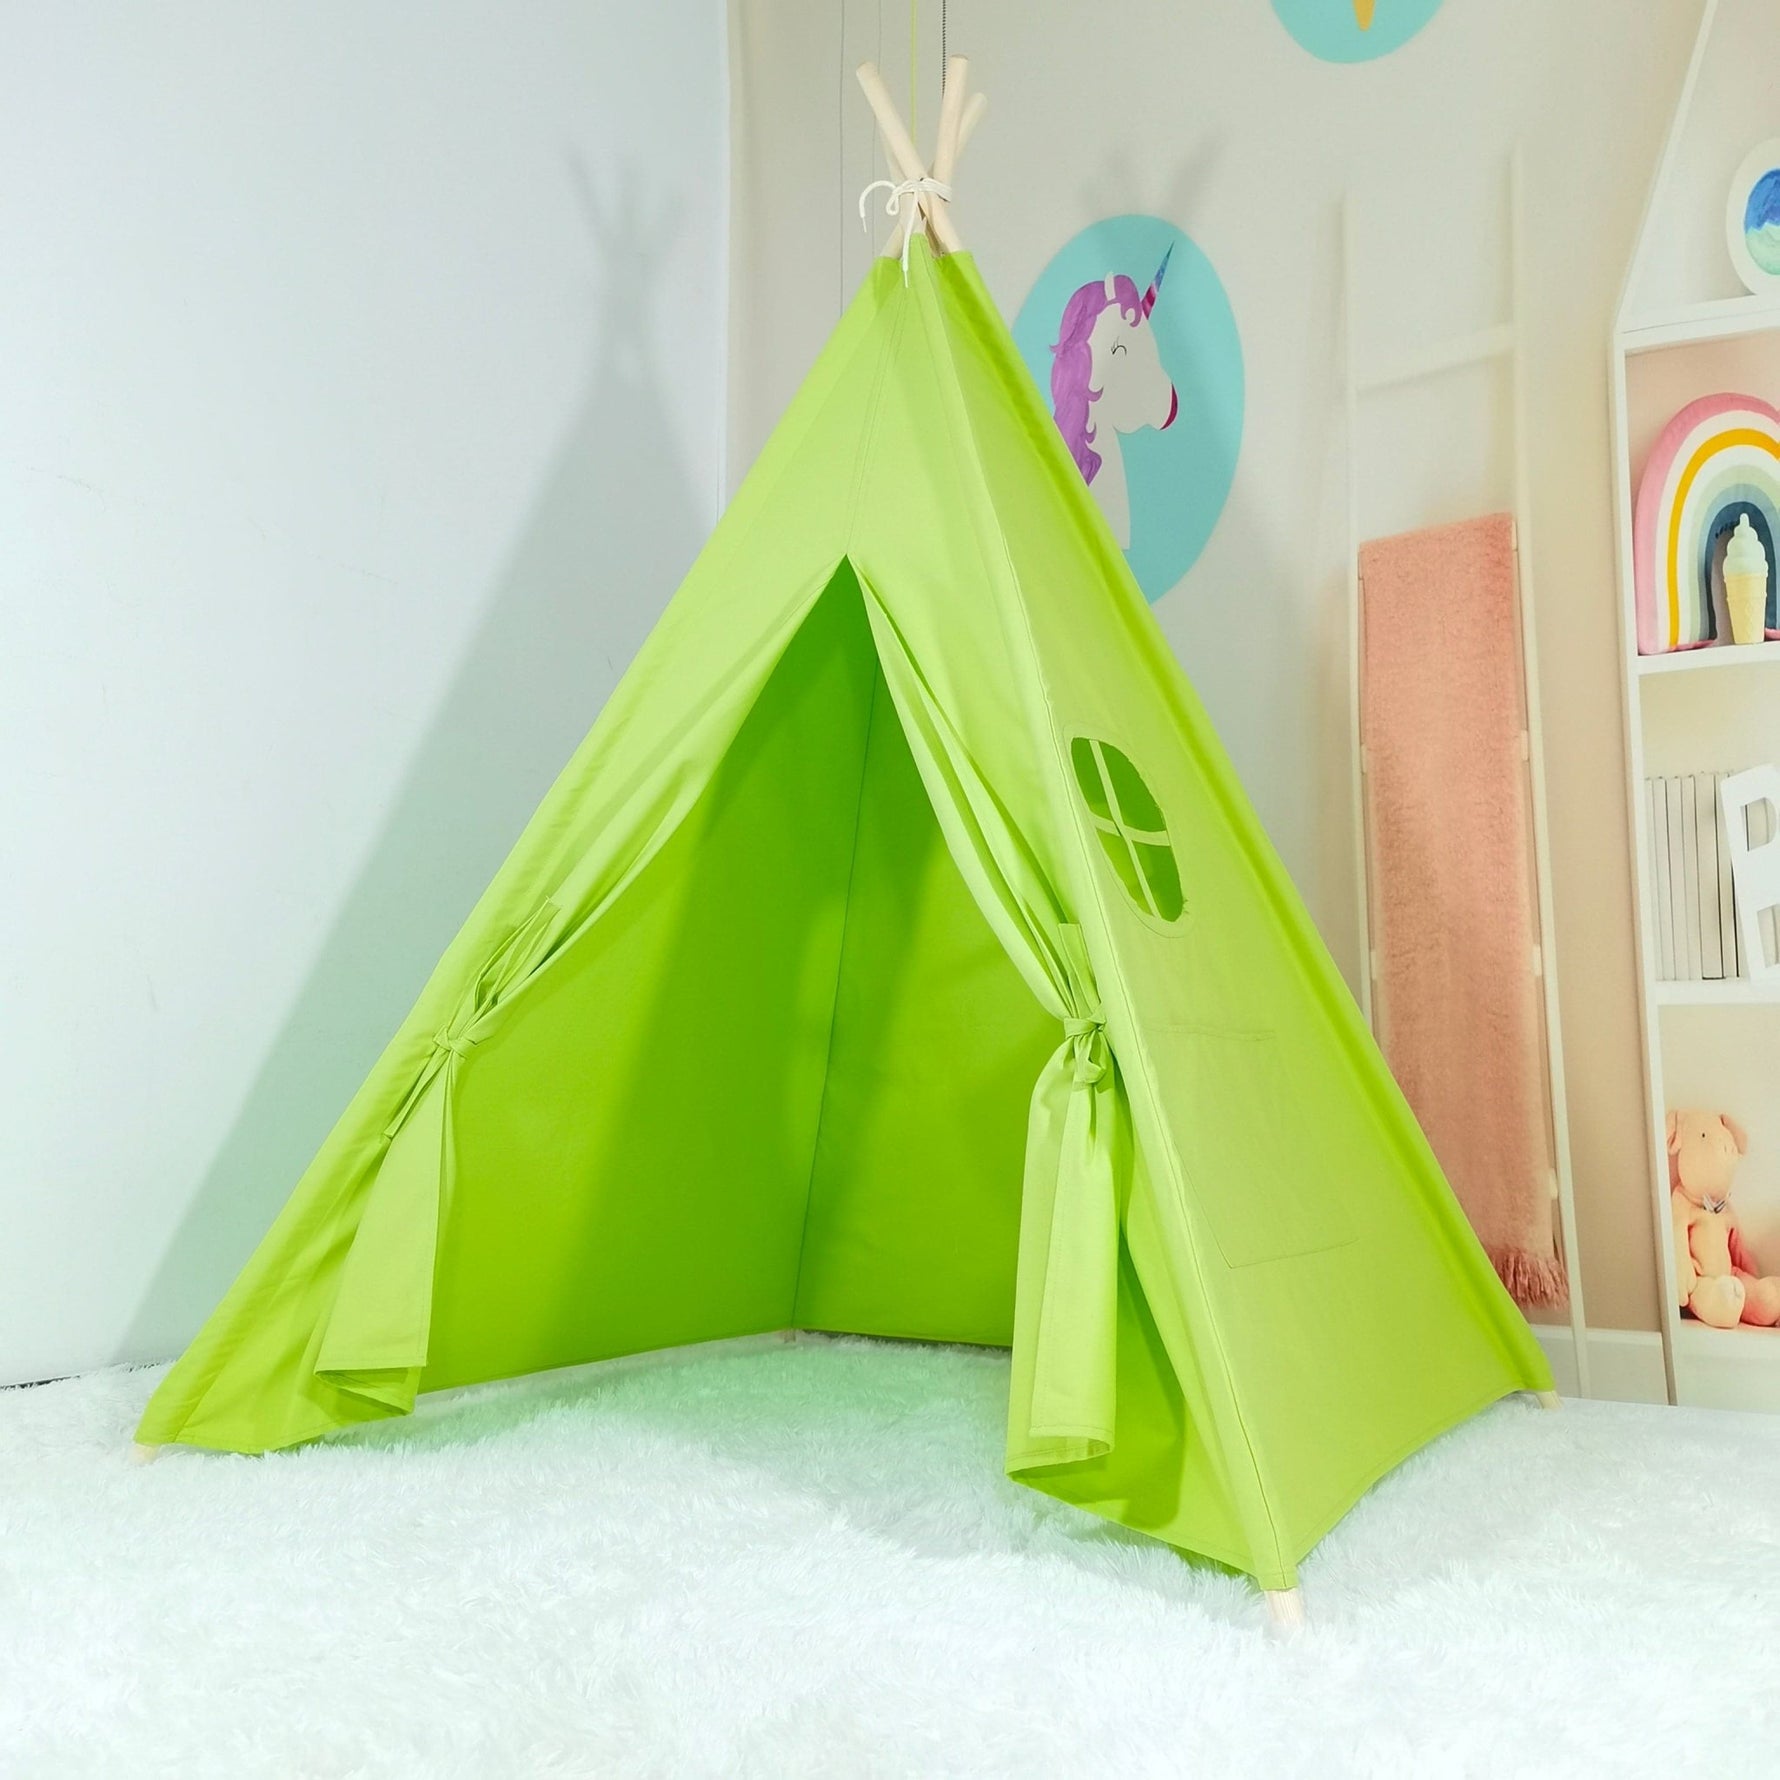 Lime Kids Teepee Tent, Teepee Tents With Lights, Pyramid Tents